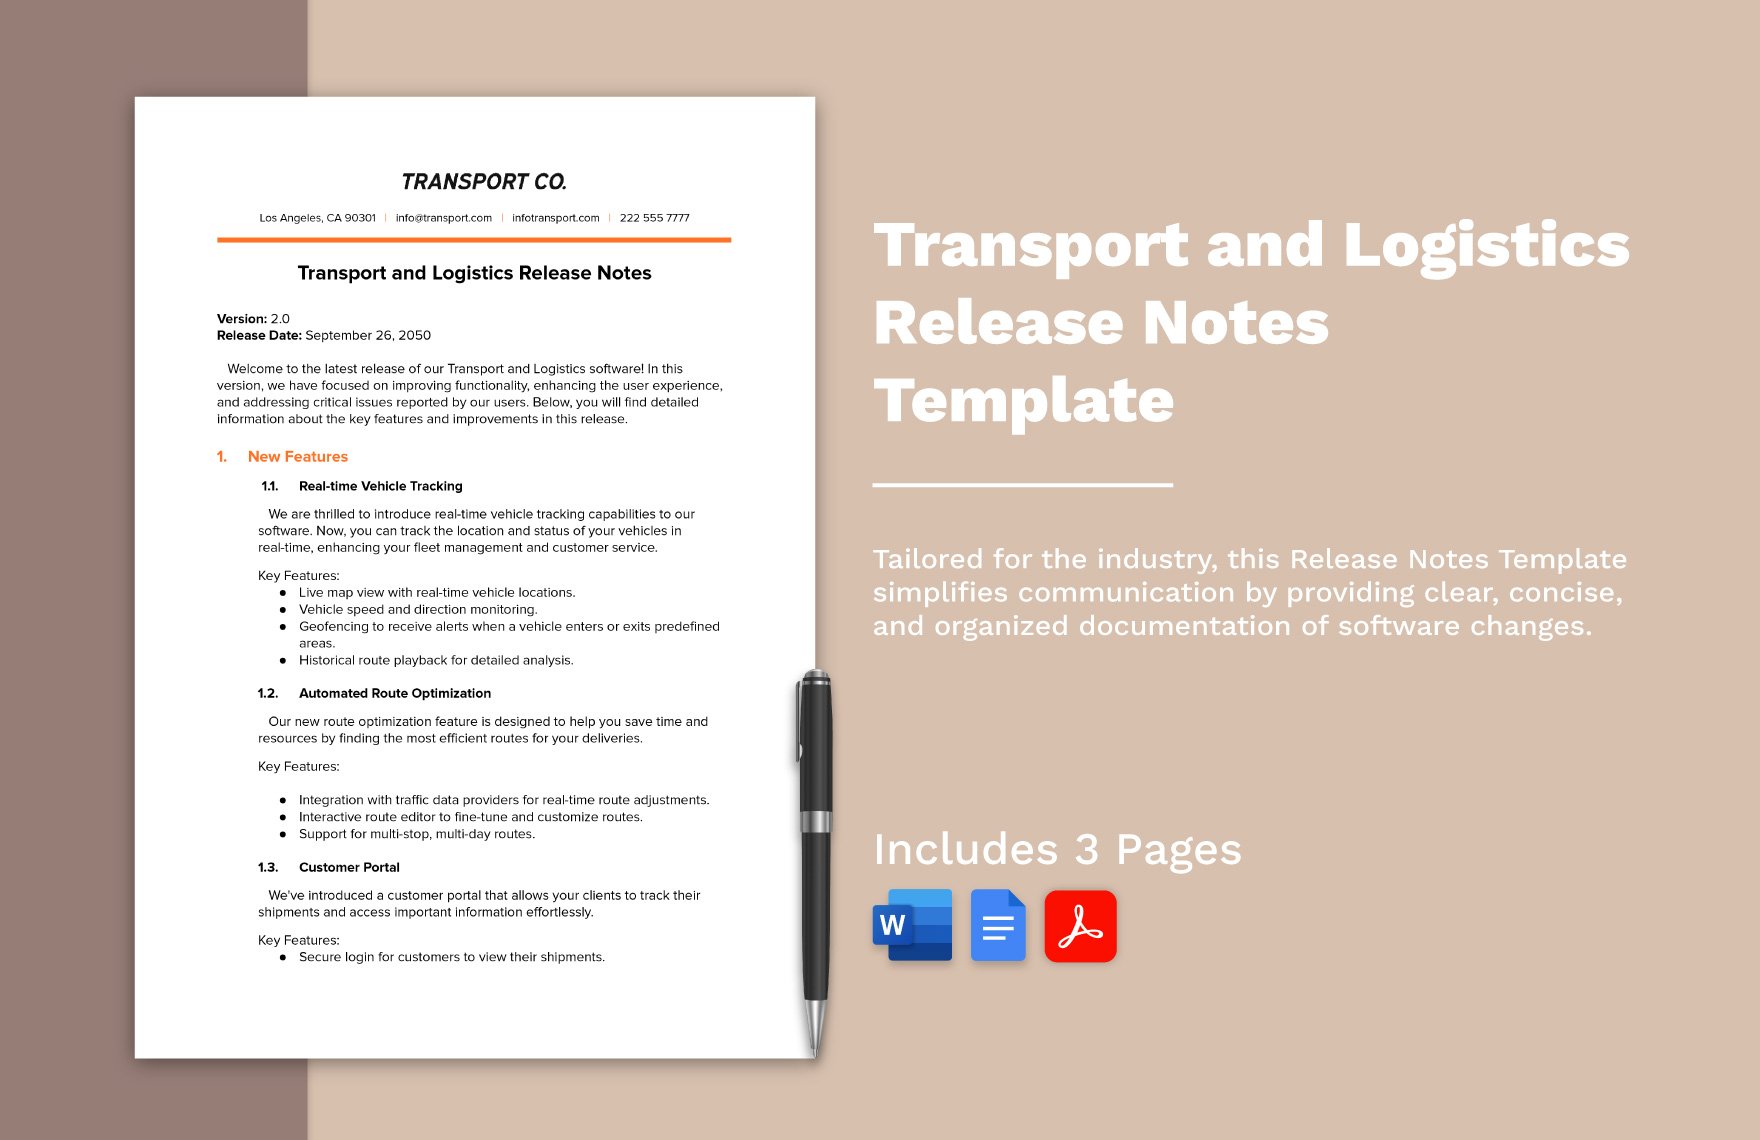 Transport and Logistics Release Notes Template in Word, Google Docs, PDF